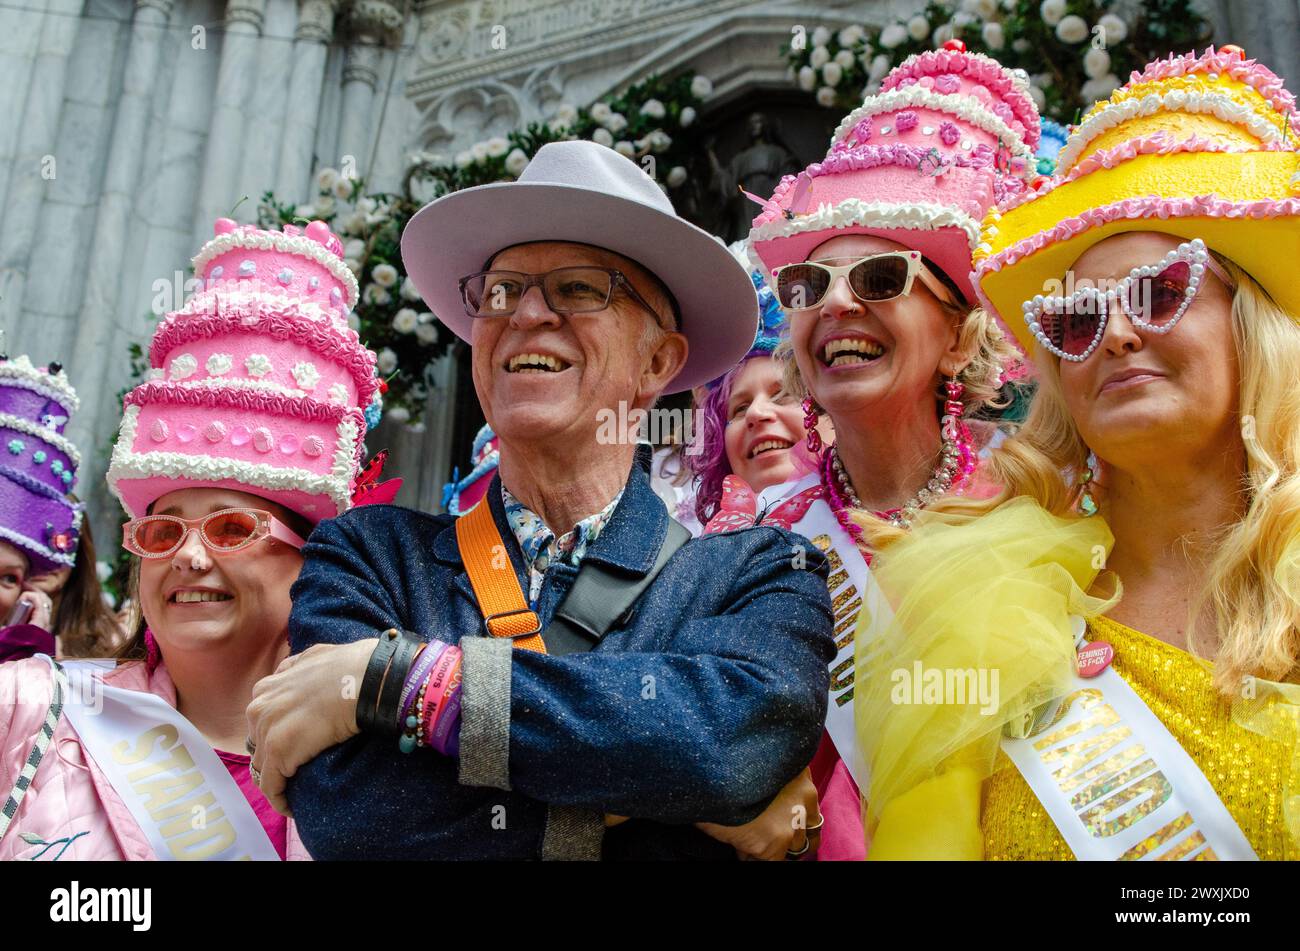 New York, USA. 31st Mar, 2024. A man poses for a picture with women wearing cake-shaped hats on the steps of St. Patrick's Cathedral in Manhattan, NY during the annual Easter Parade and Bonnet Festival on March 31, 2024. The parade and festival, which takes place on Easter Sunday, is a New York City tradition dating back to the 1870s. (Photo by Katie Smith/Sipa USA) Credit: Sipa USA/Alamy Live News Stock Photo